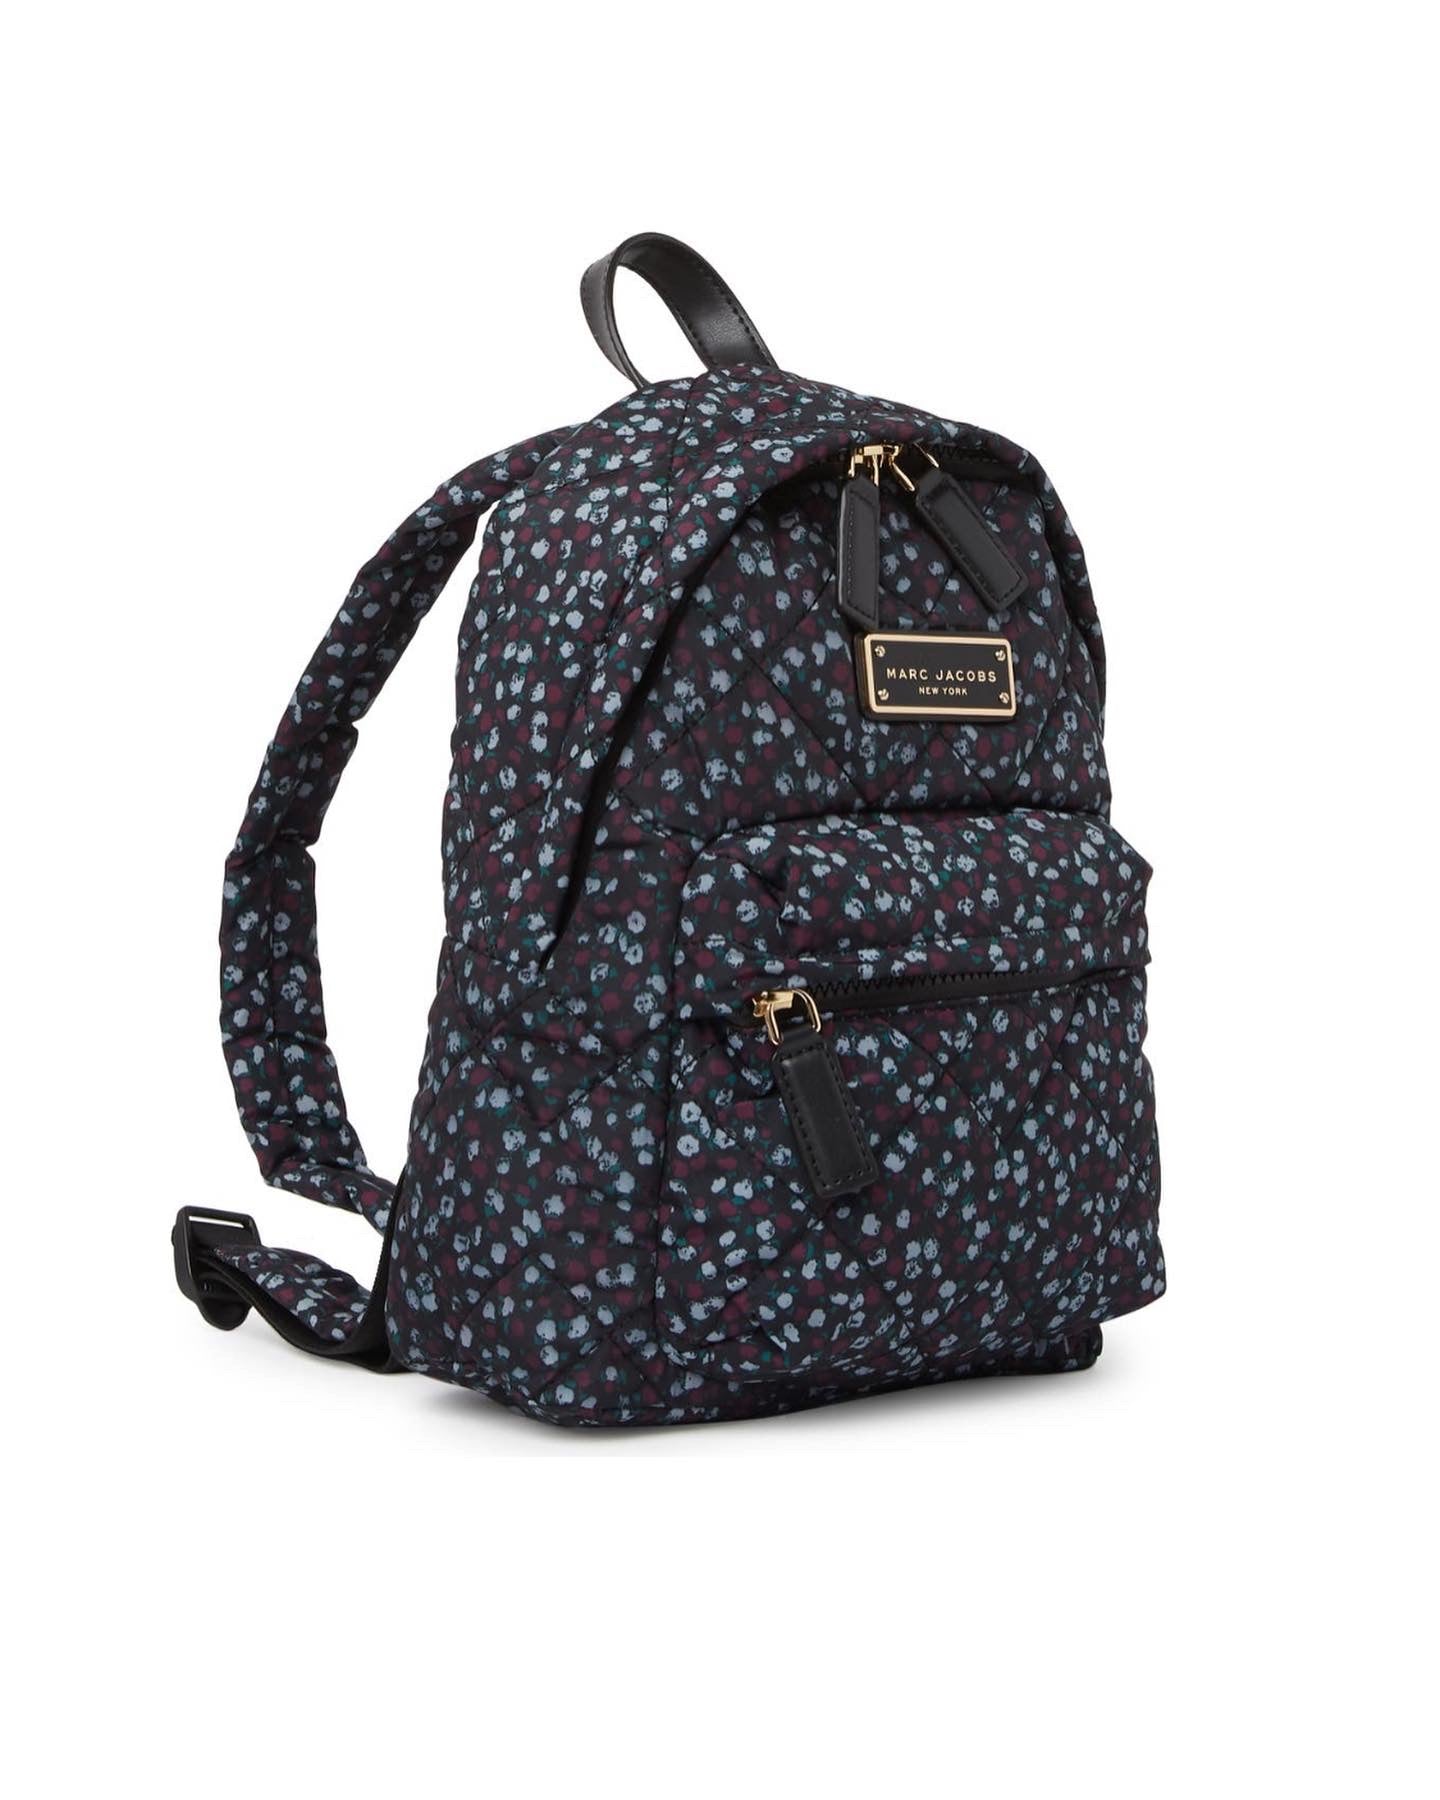 Marc Jacobs Quilted Nylon Printed Mini Backpack, Blue Mirage Multi